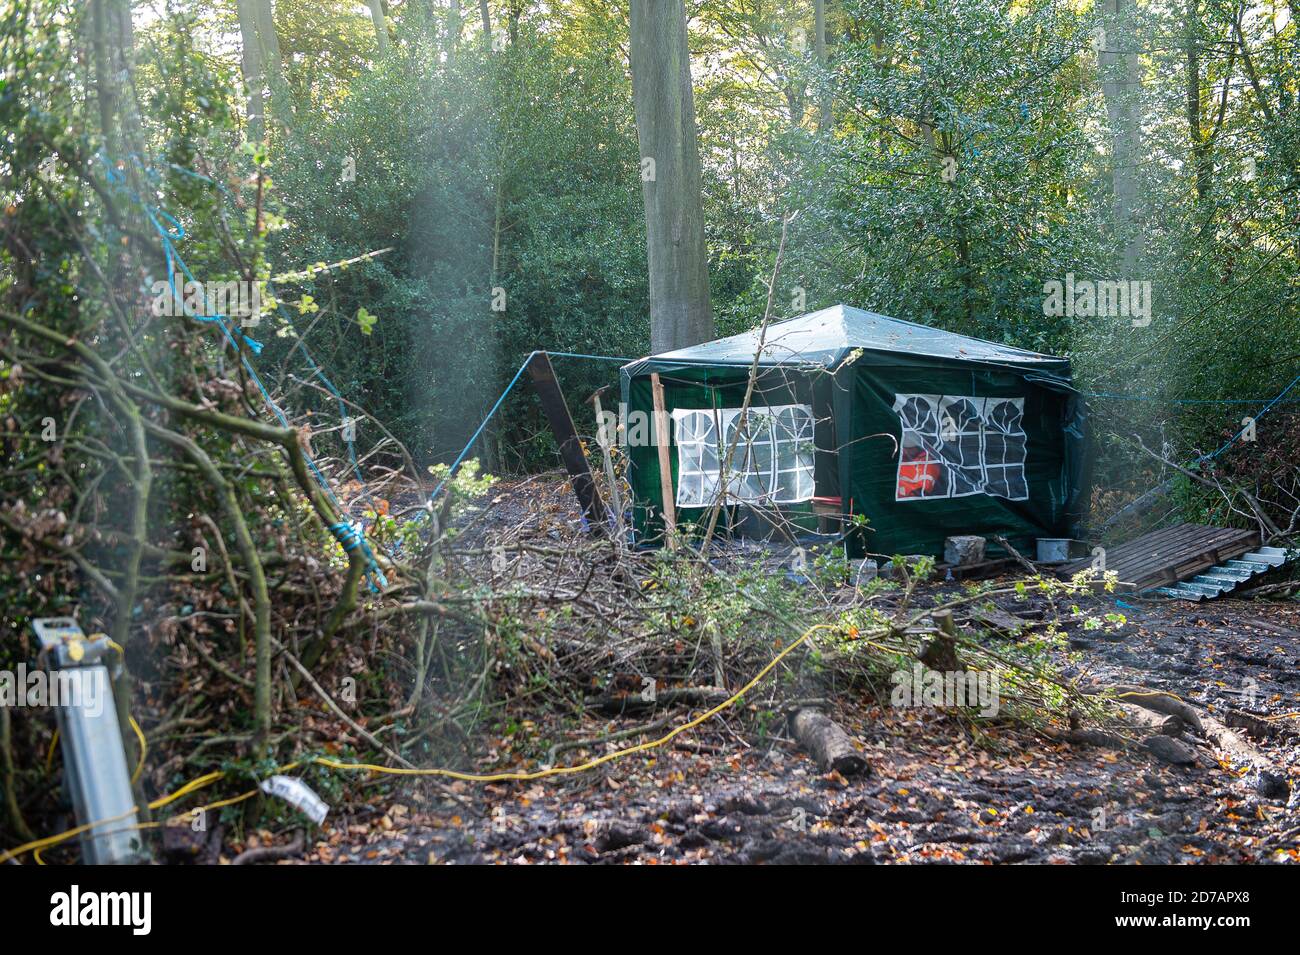 Aylesbury Vale, UK. 20th October, 2020. Law firm Leigh Day have sent a second letter to HS2 Limited asking them to stop work at Jones Hill Wood following the discovery of 'incredibly rare' Barbastelle bats in the ancient woodlands. HS2 have already caused disturbance in the woods and are now constructing an access road into the woods. If HS2 continue working in these woods without the necessary licence, they may allegedly be committing a criminal offence under s43 Conservation of Habitats and Species Regulations 2017. Credit: Maureen McLean/Alamy Stock Photo